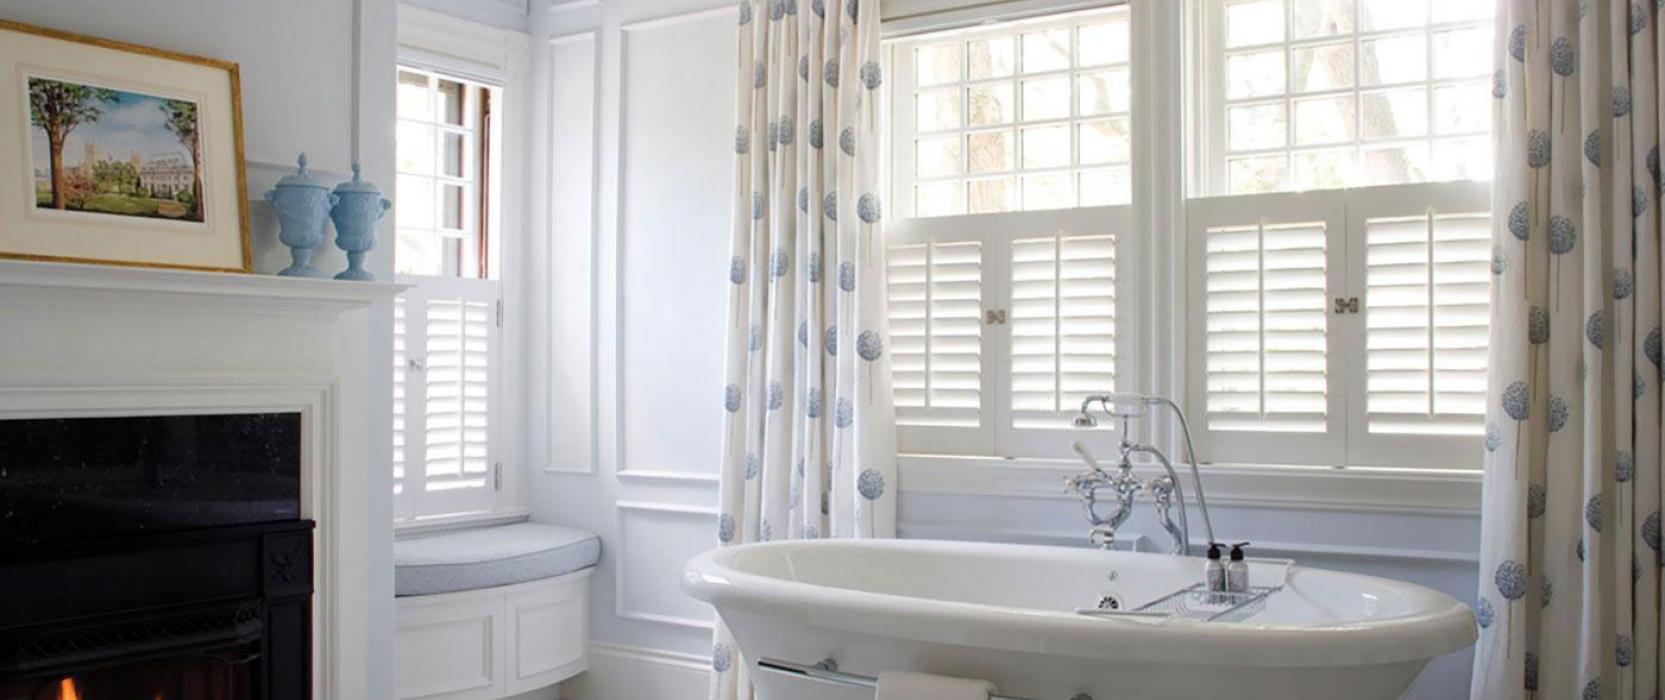 Back Bay Shutter master bath with fireplace. Meyer and Meyer Architects